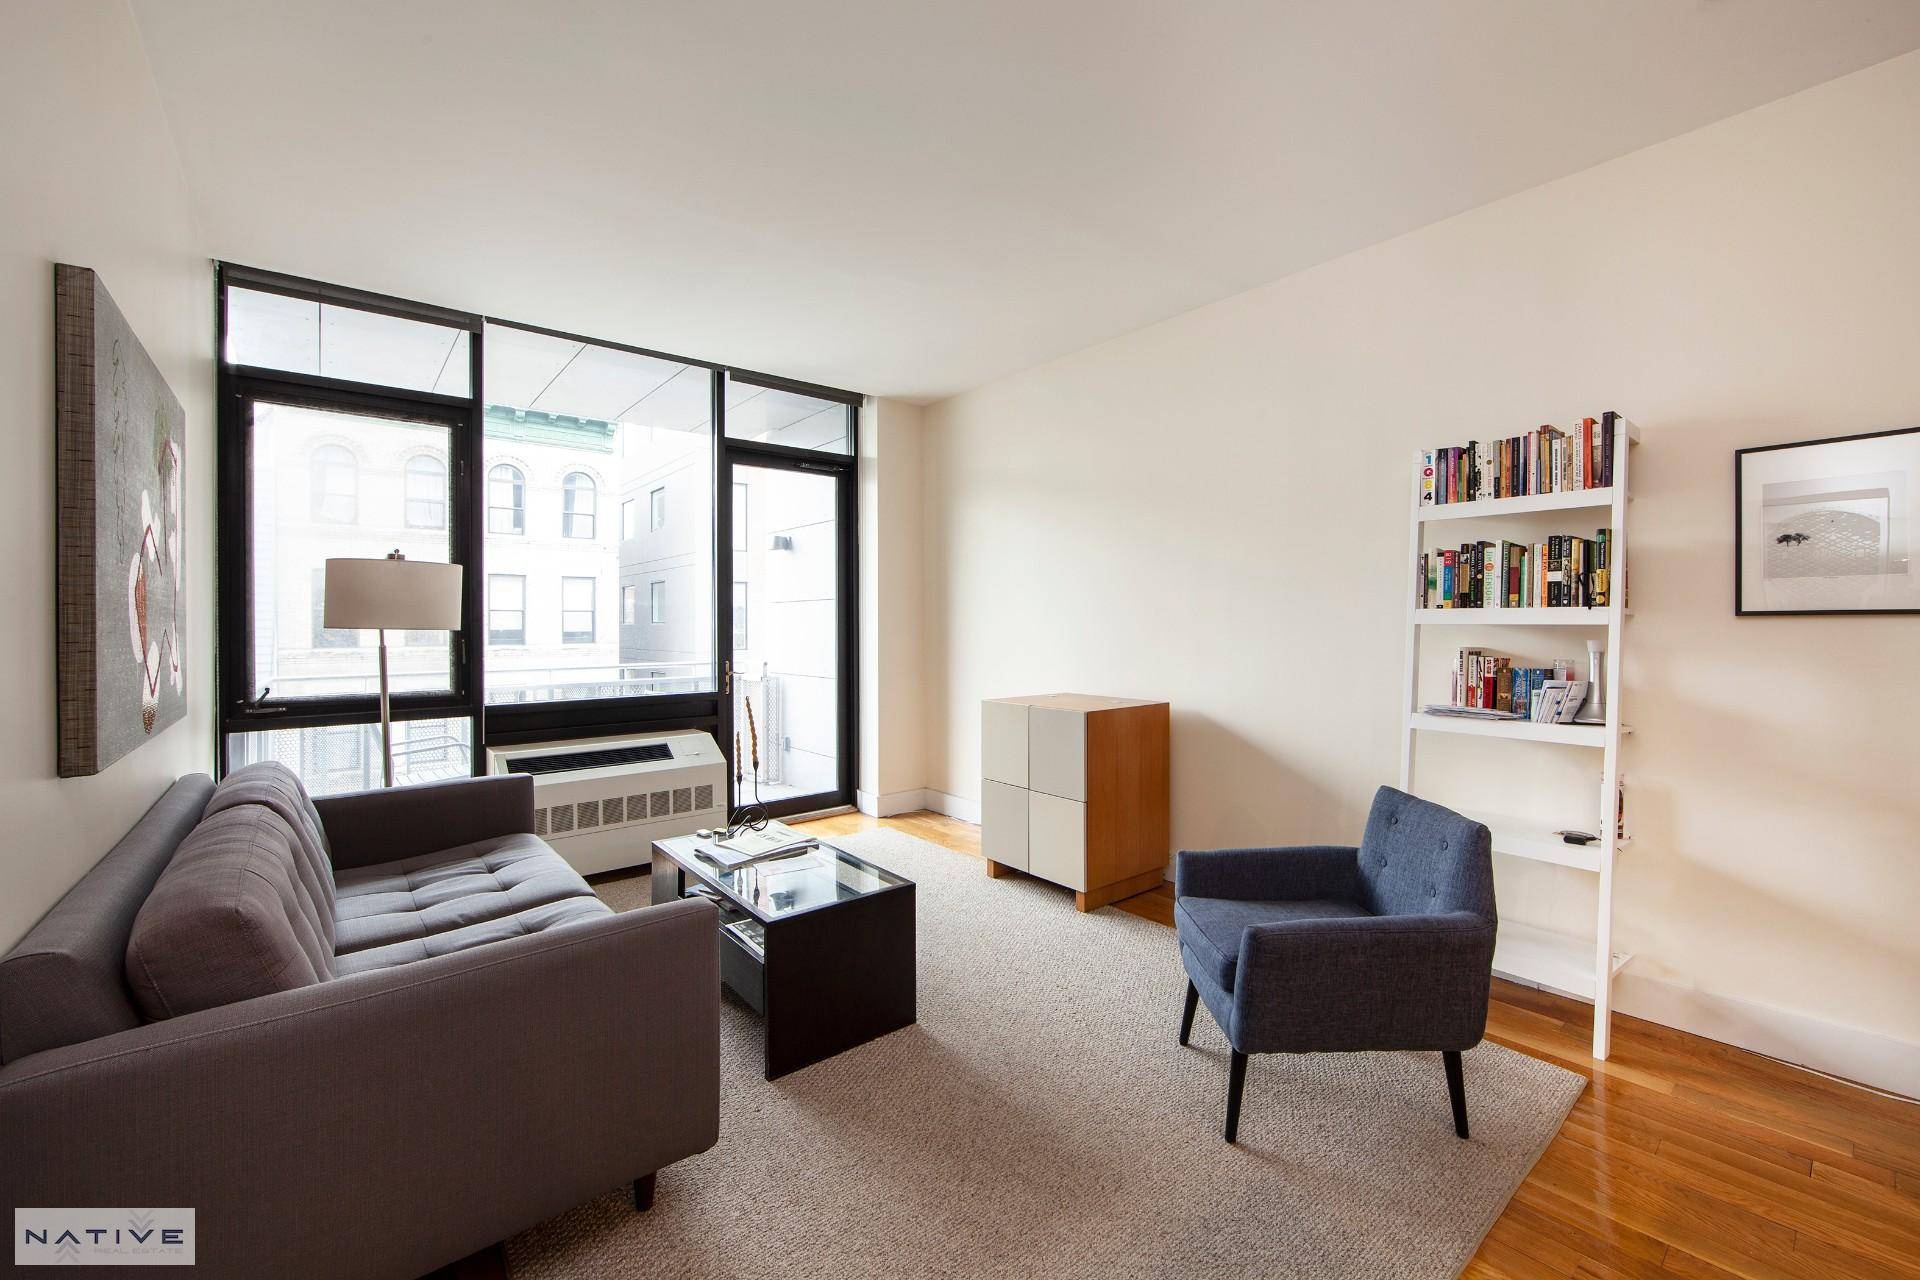 Welcome home to this rare 2 bedroom, 2 bathroom home boasting open style living with floor to ceiling windows elegantly framing Brooklyn views and oak flooring throughout.